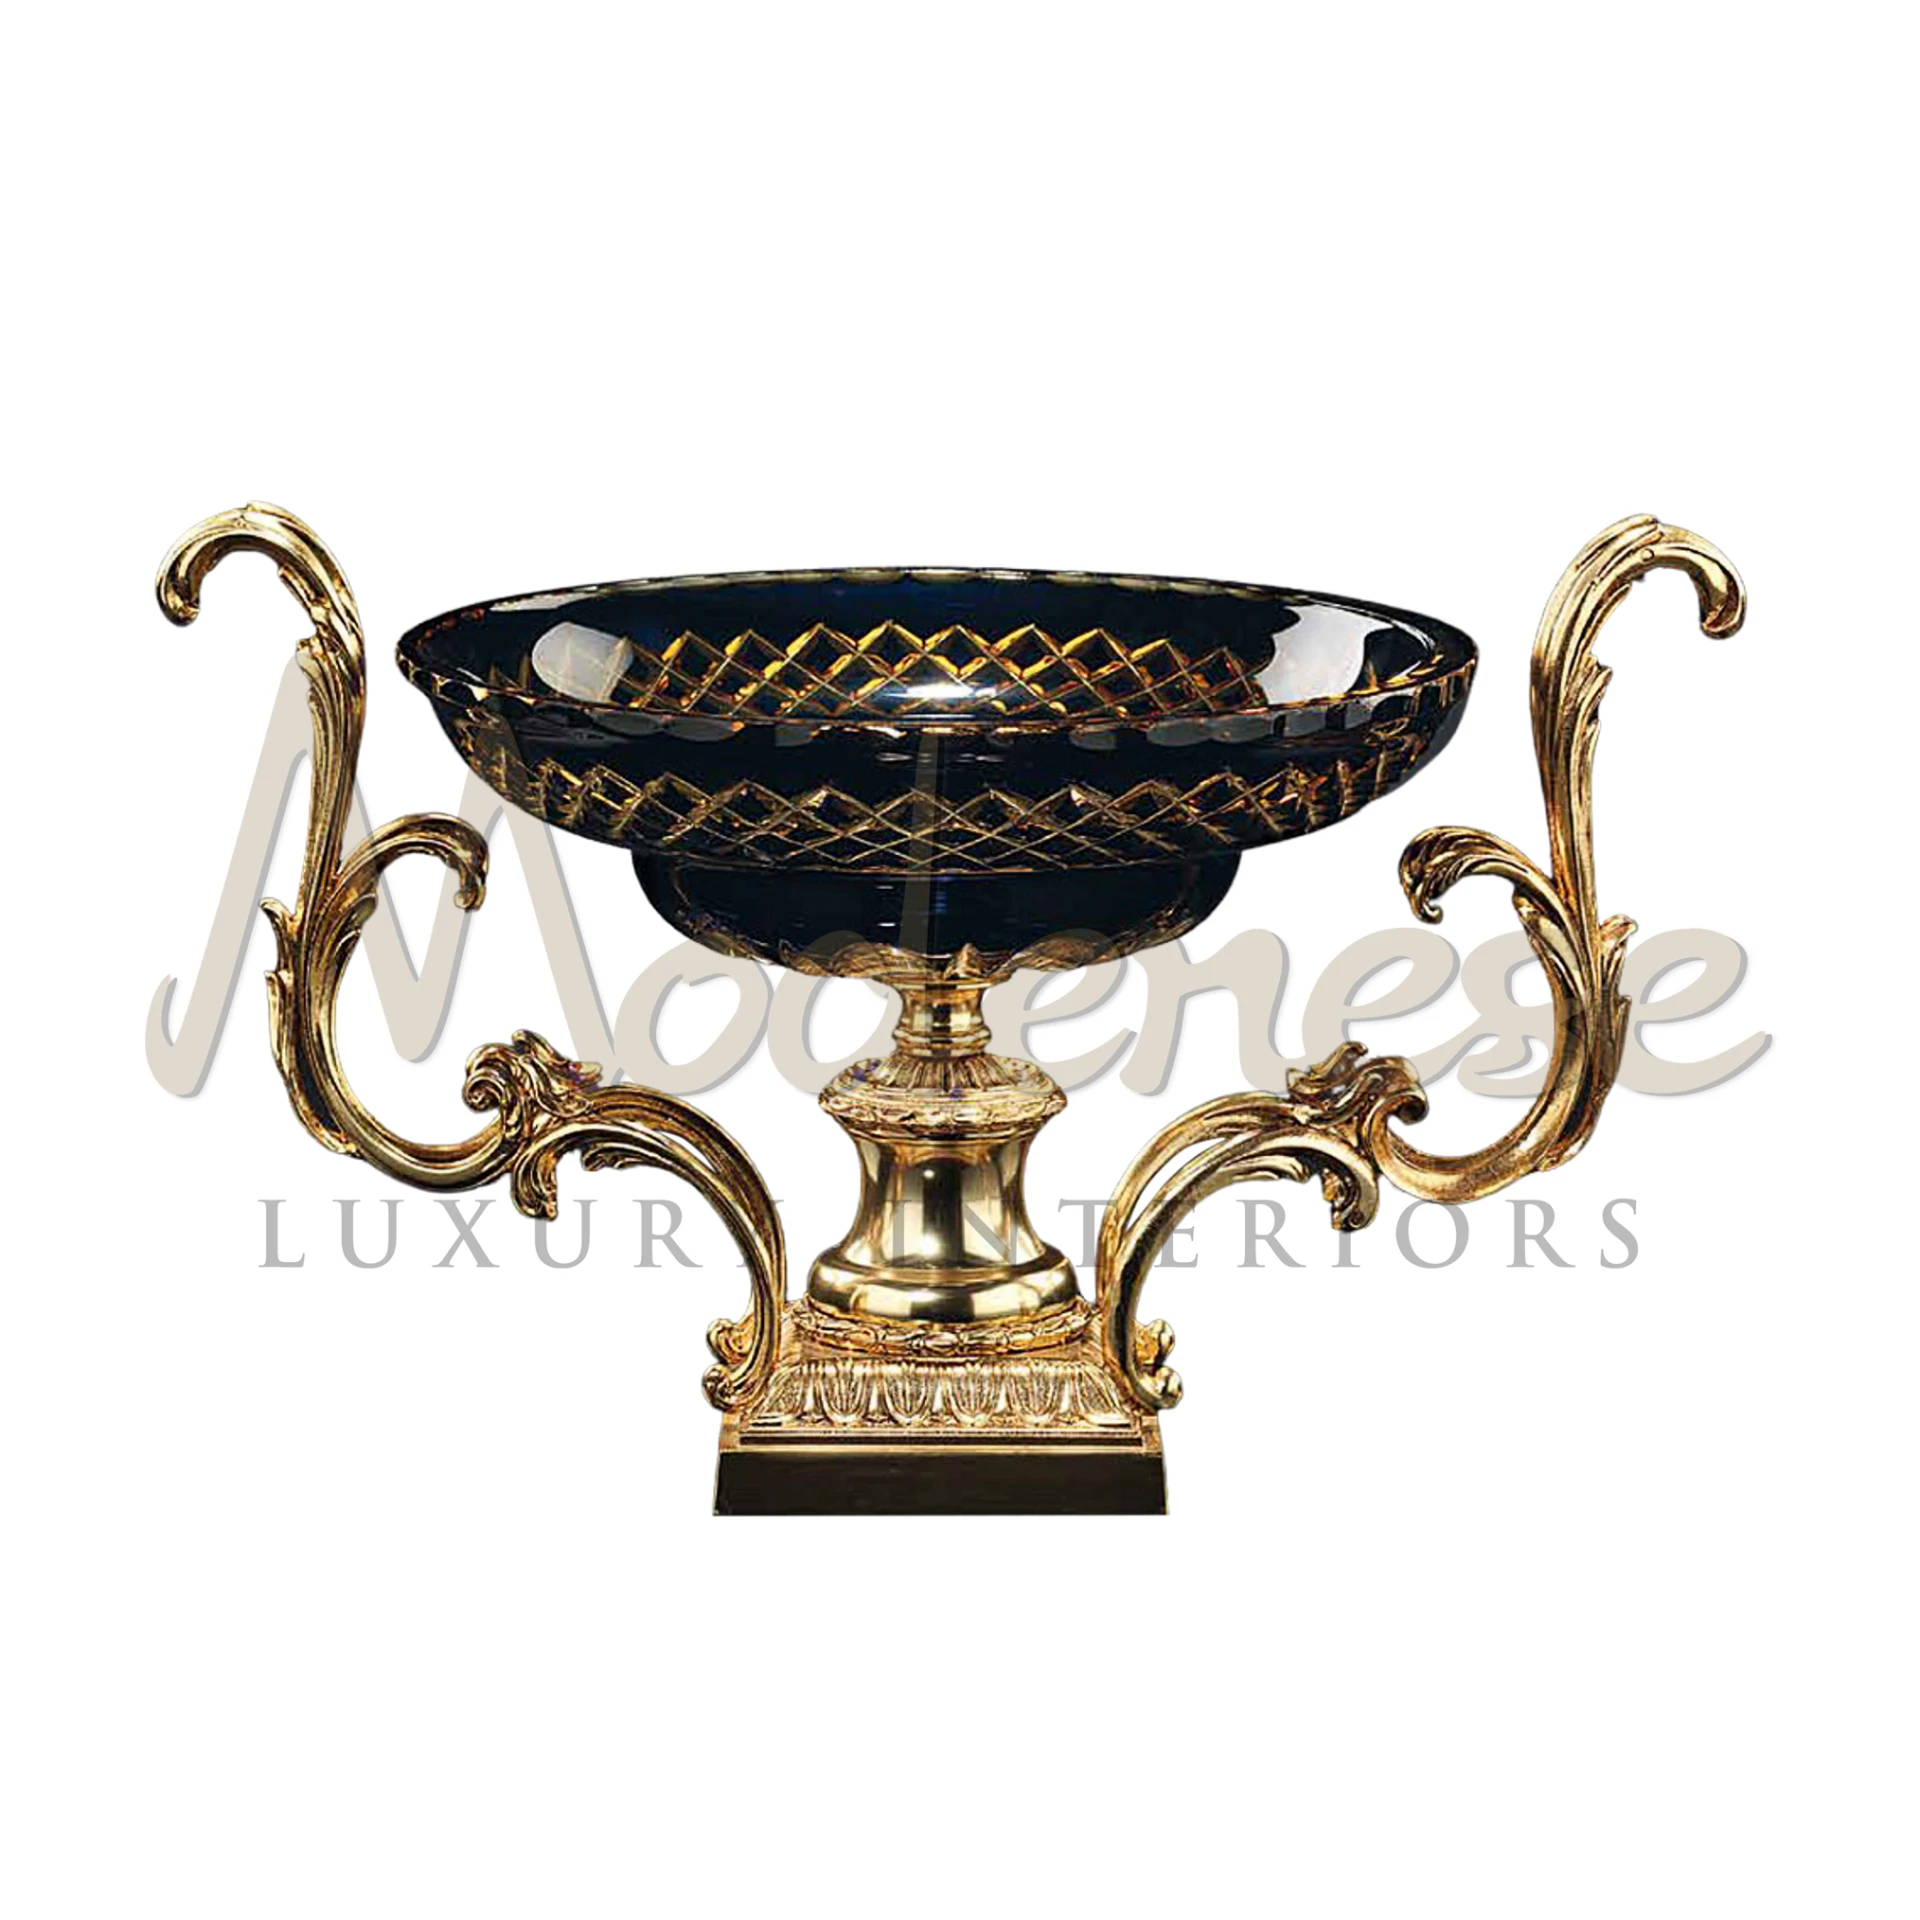 Luxurious Classical Figured Glass Bowl by Modenese, featuring intricate patterns and expert craftsmanship for elegant interiors.